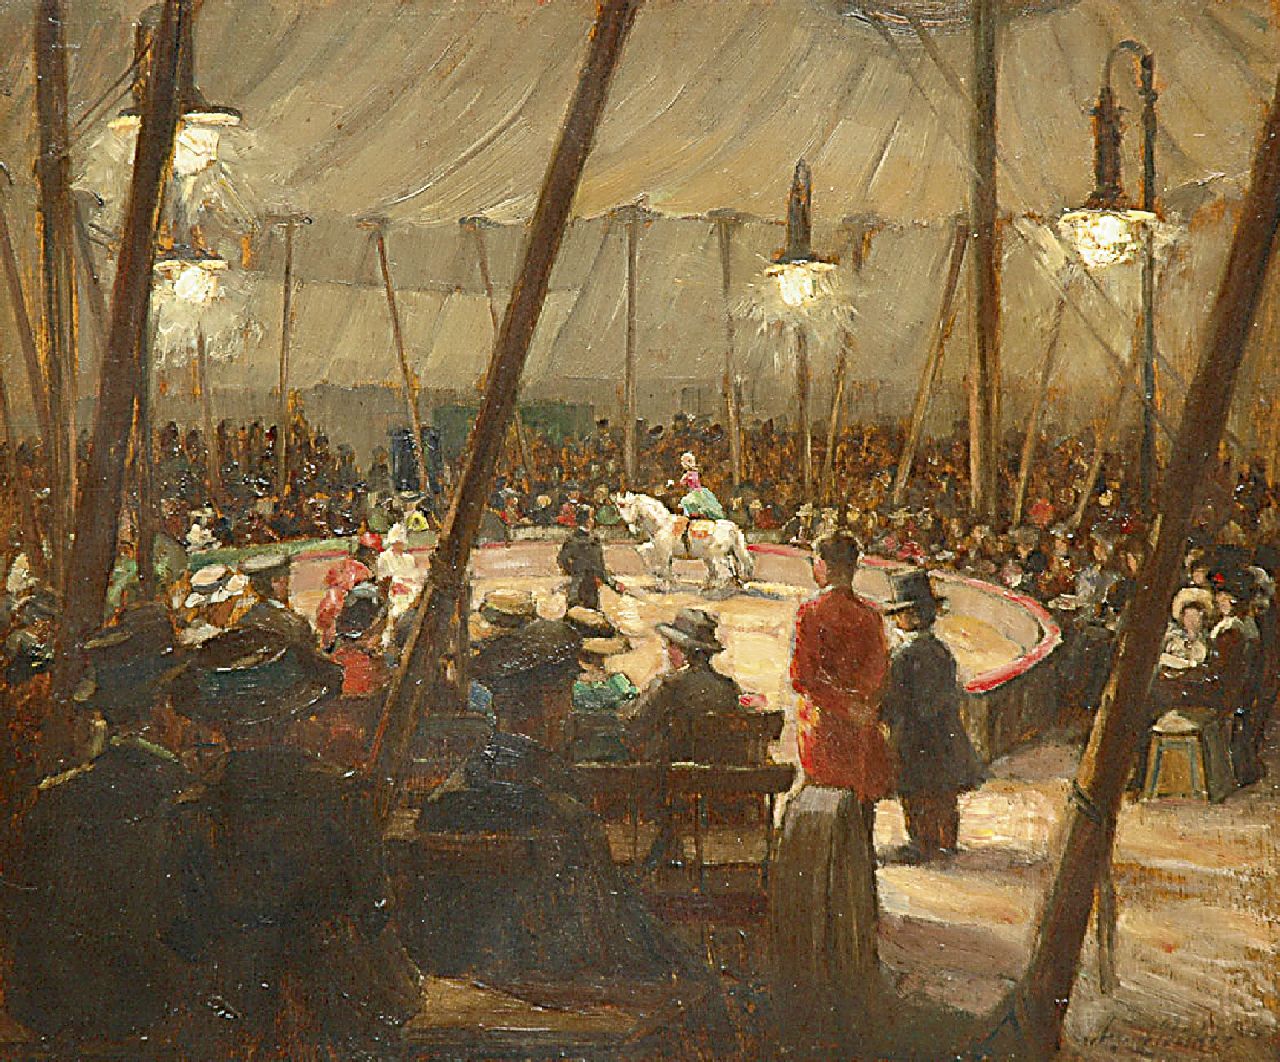 Böcher A.  | August Böcher, At the circus, oil on panel 42.6 x 50.0 cm, signed l.r.